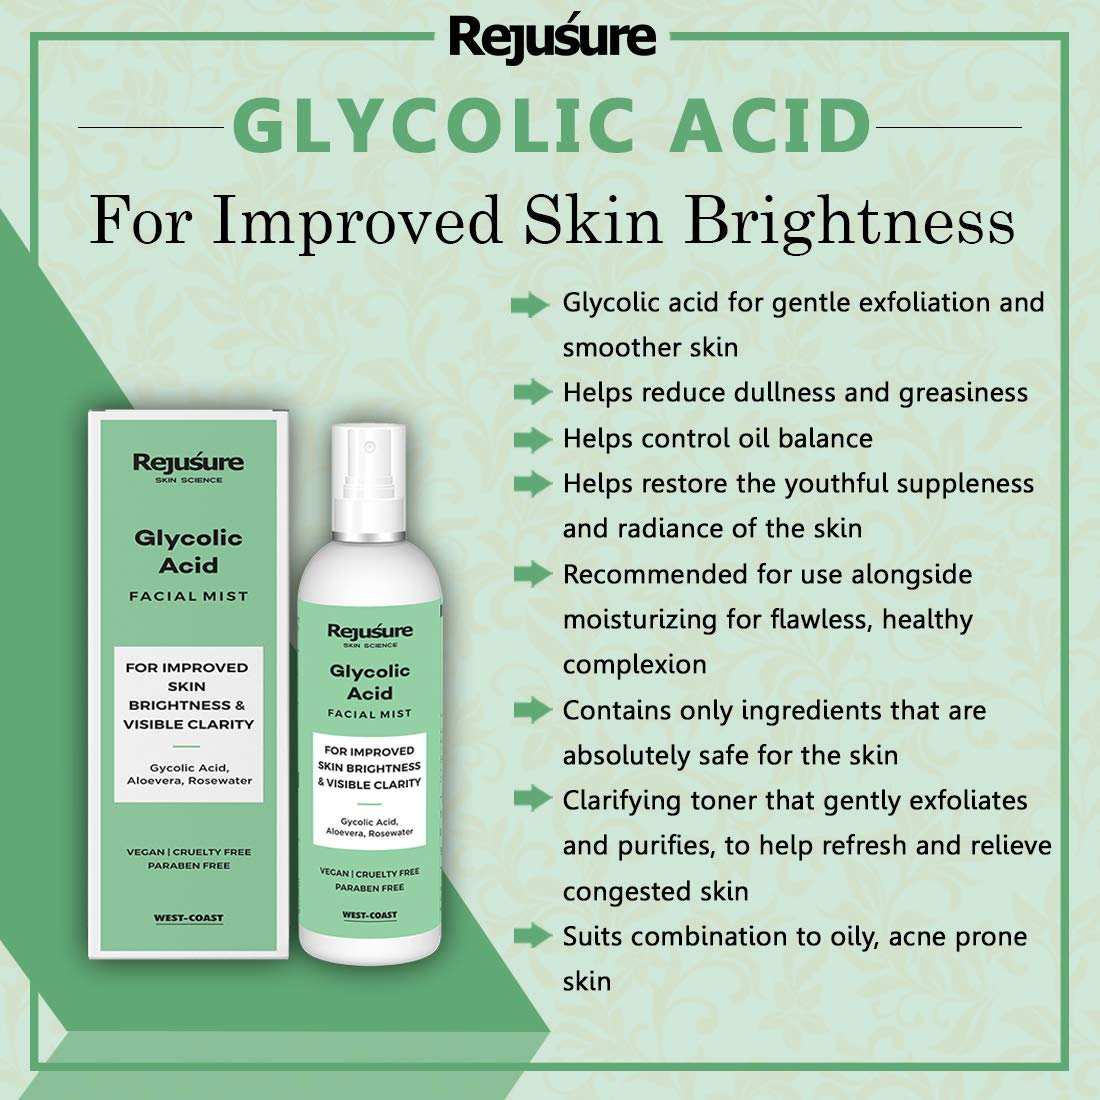 Rejusure Glycolic Acid Face mist – For Improved Skin Brightness & Visible Clarity – 100ml (Pack of 2)